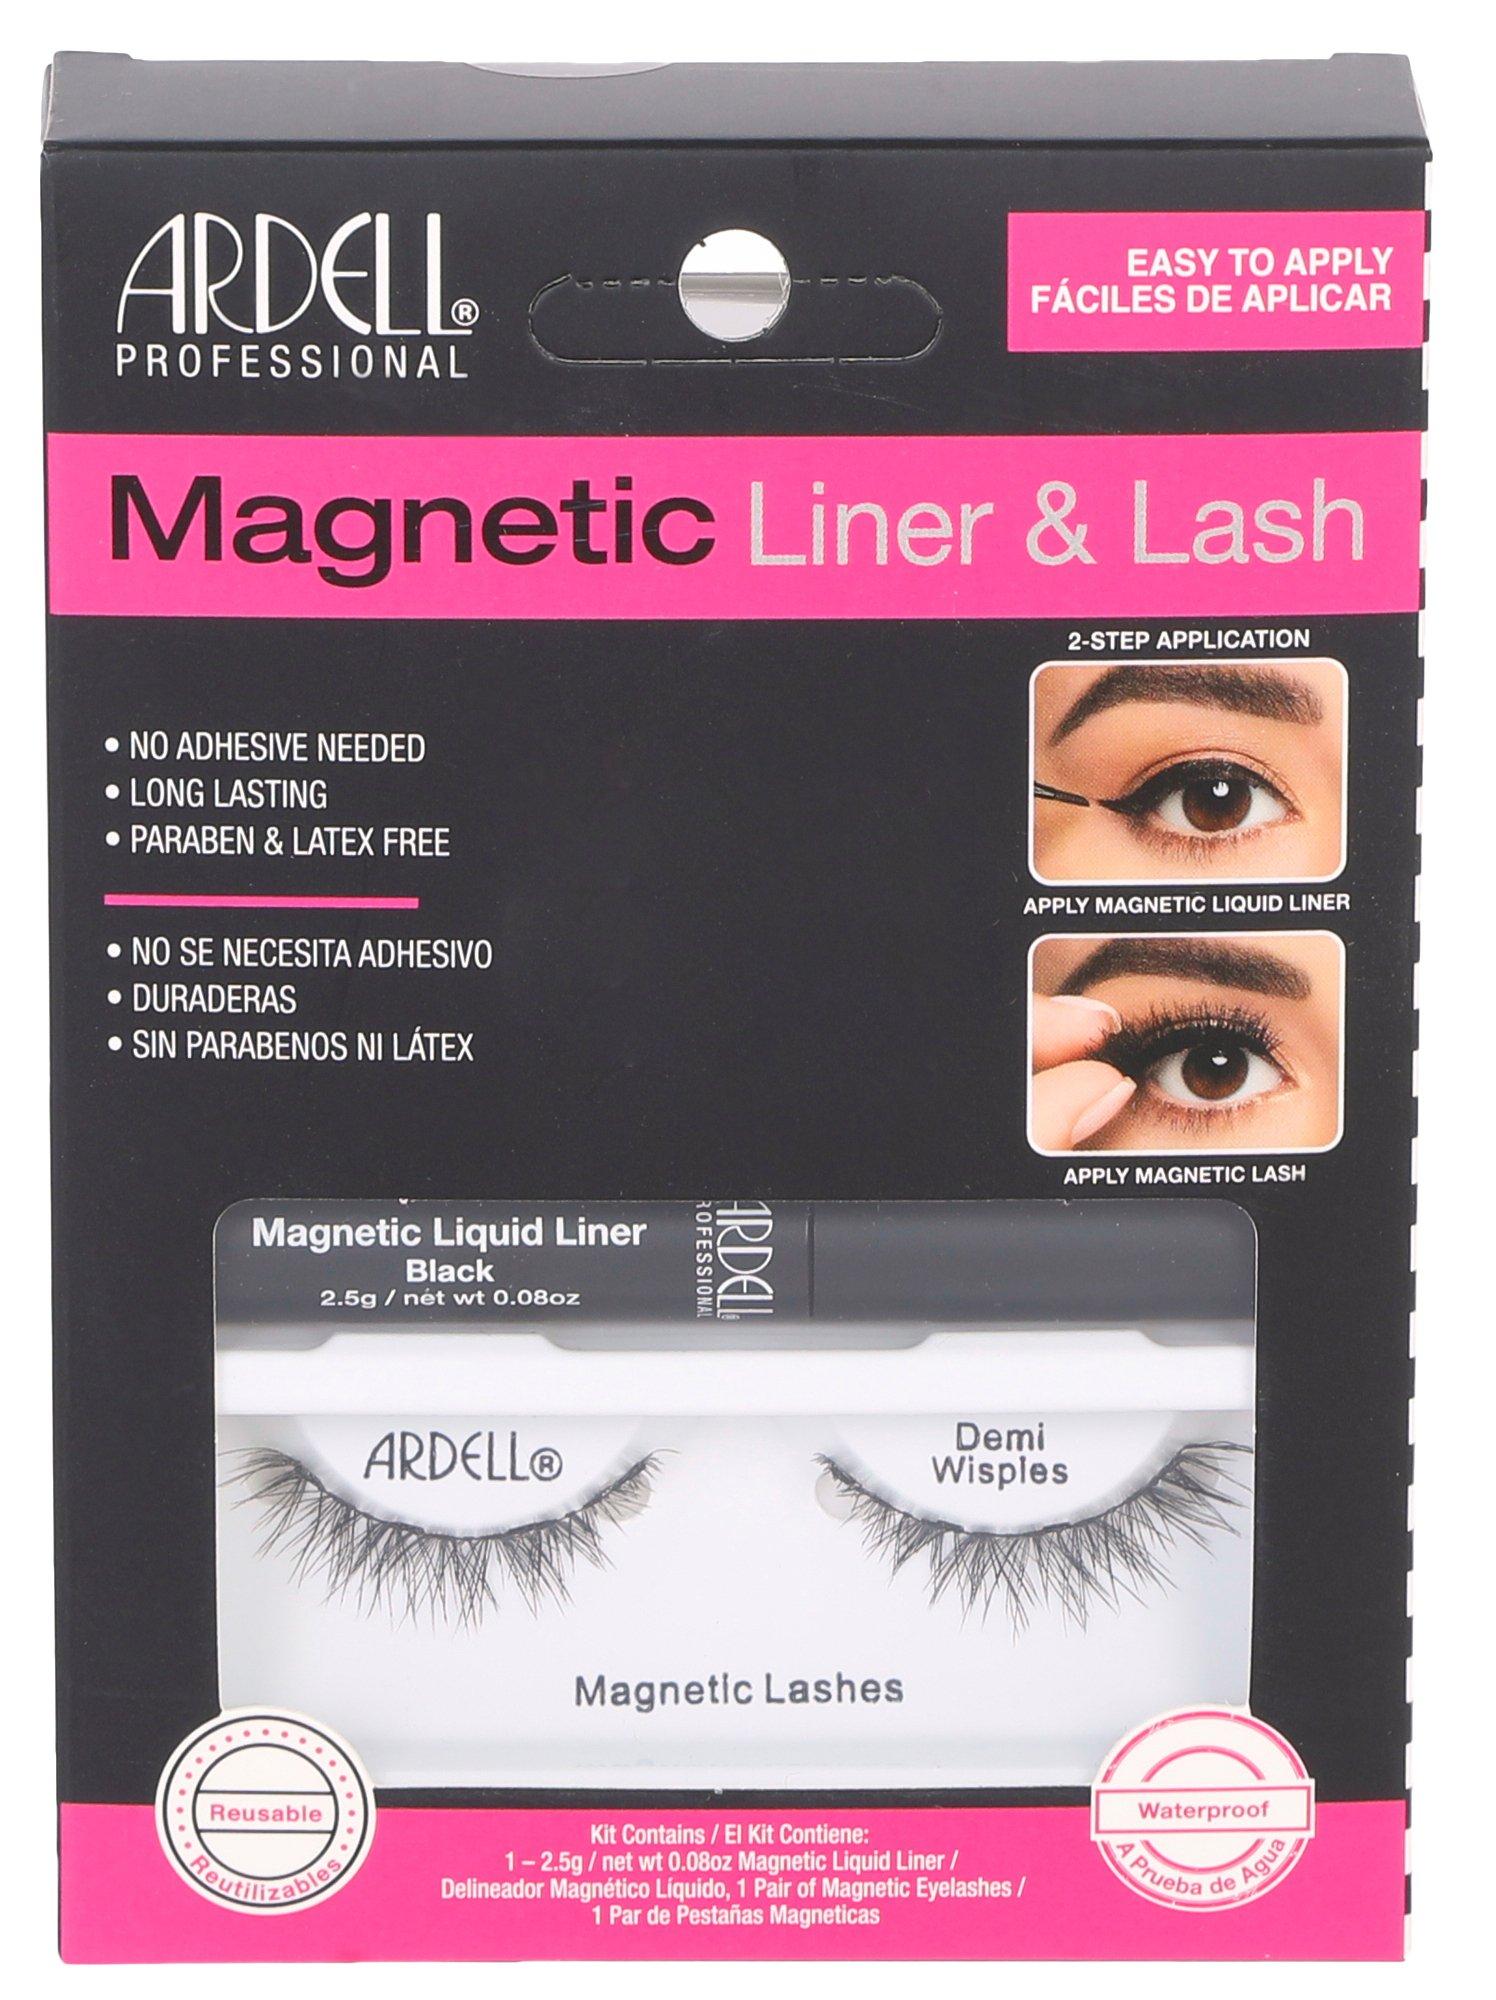 Magnetic Liner & Lashes